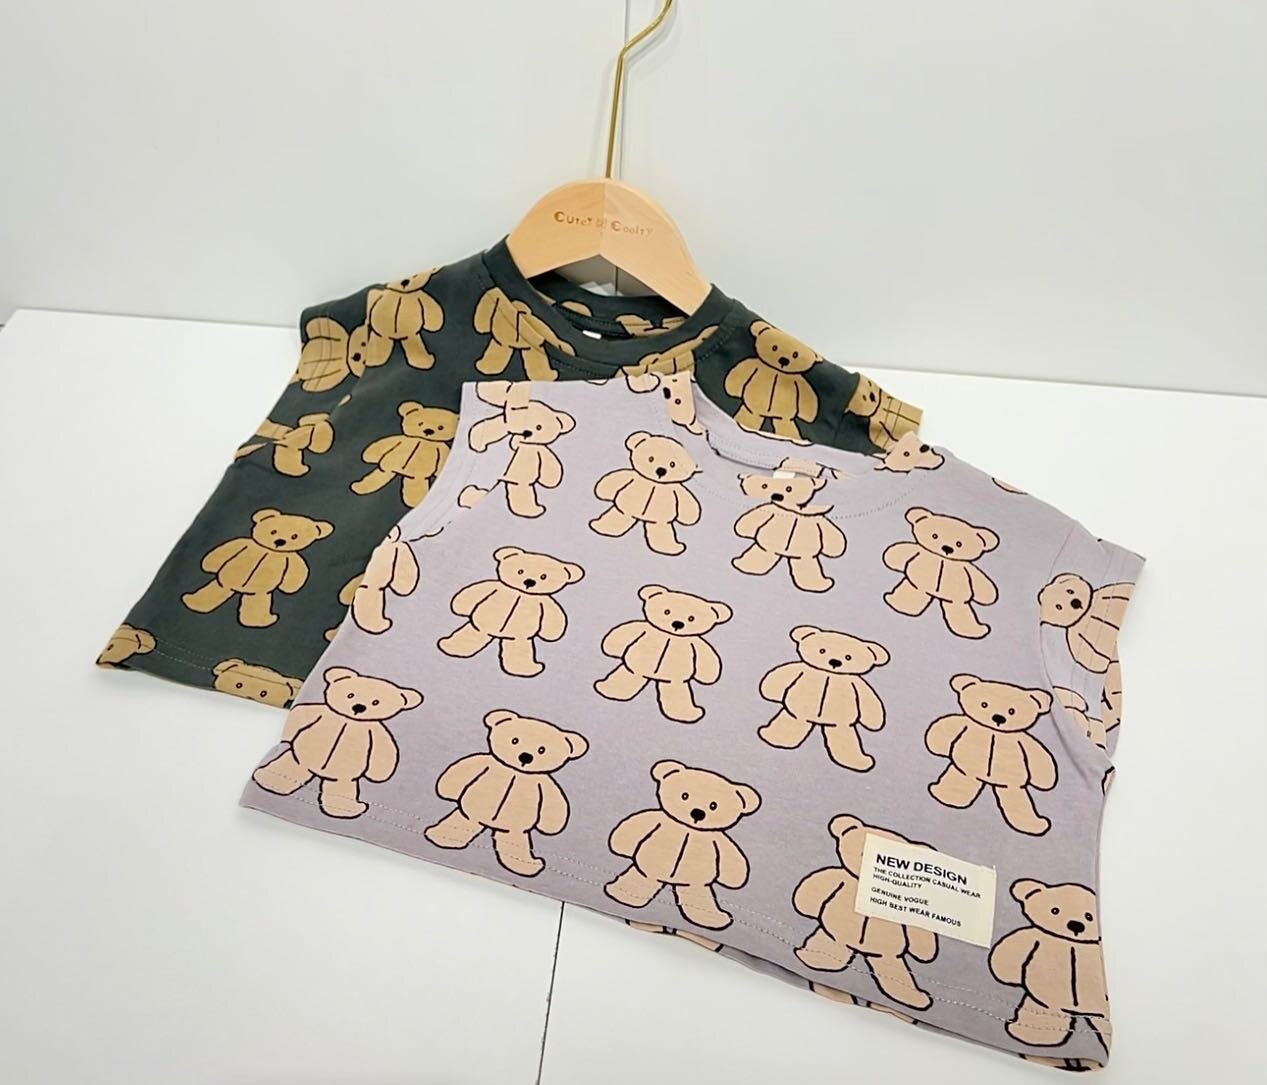 Bear Tees🧸

#kidsclothes #toddlerfashion #outfitinspiration #tees #cuteyncoolty #vancouver